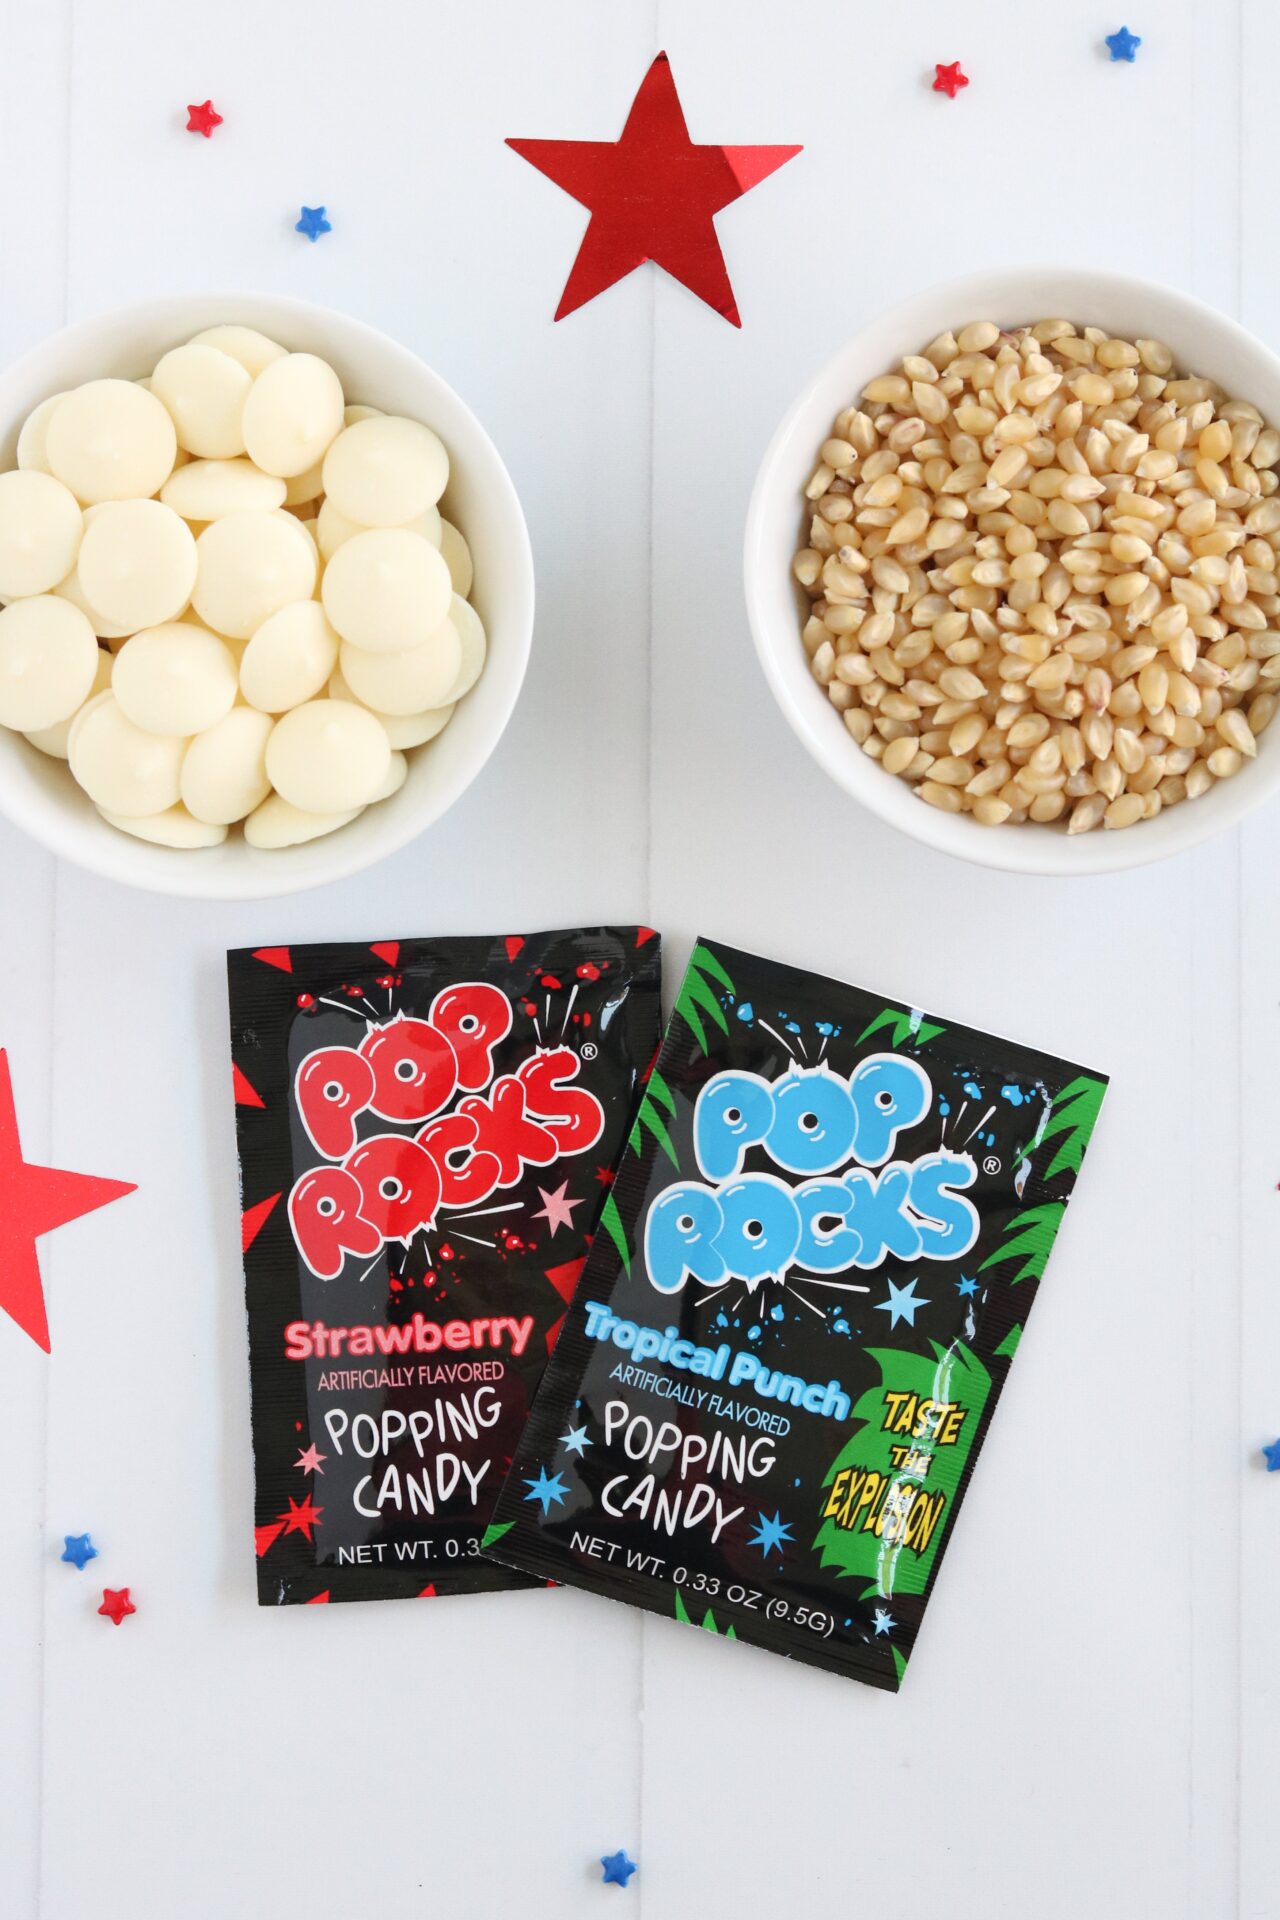 Looking for a tasty treat this Fourth of July? Well, look no further because Firecracker popcorn is the perfect treat no matter your Fourth of July plans!